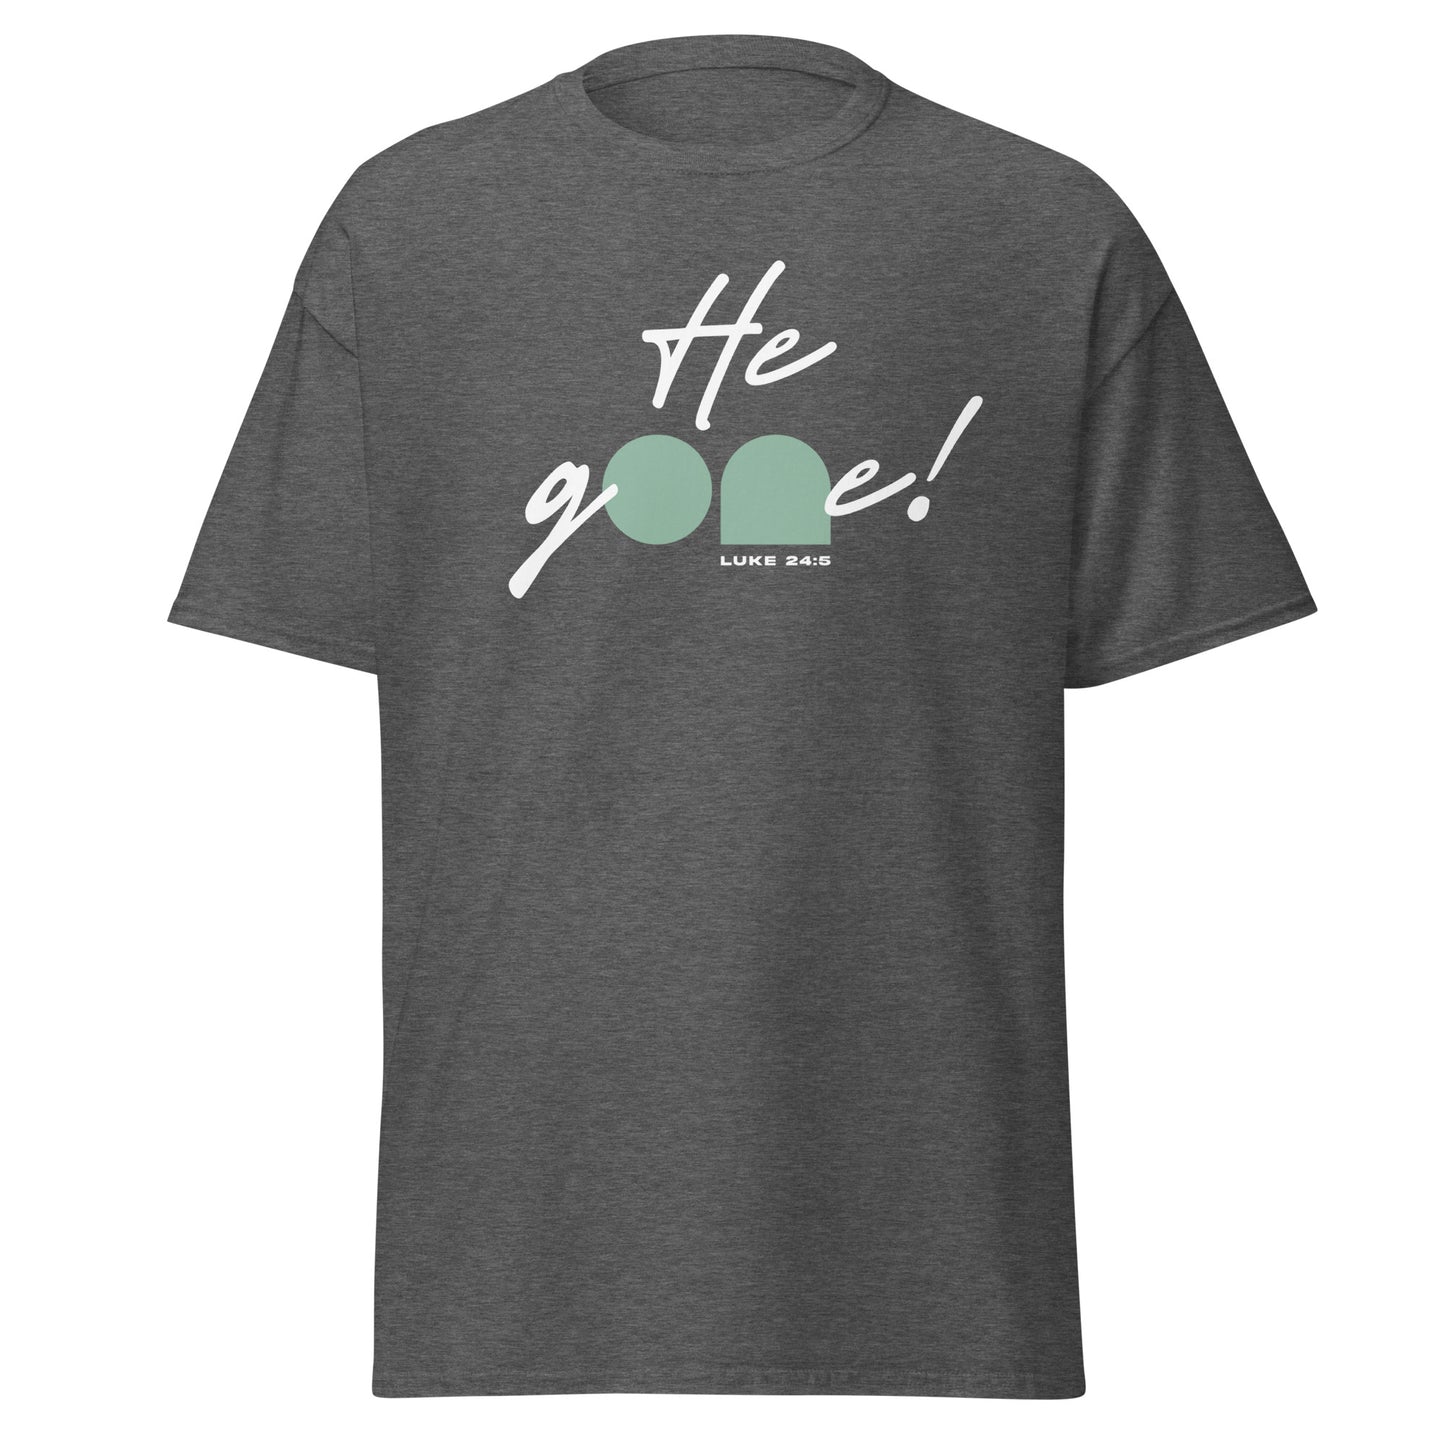 "He Gone!" Easter T-Shirt